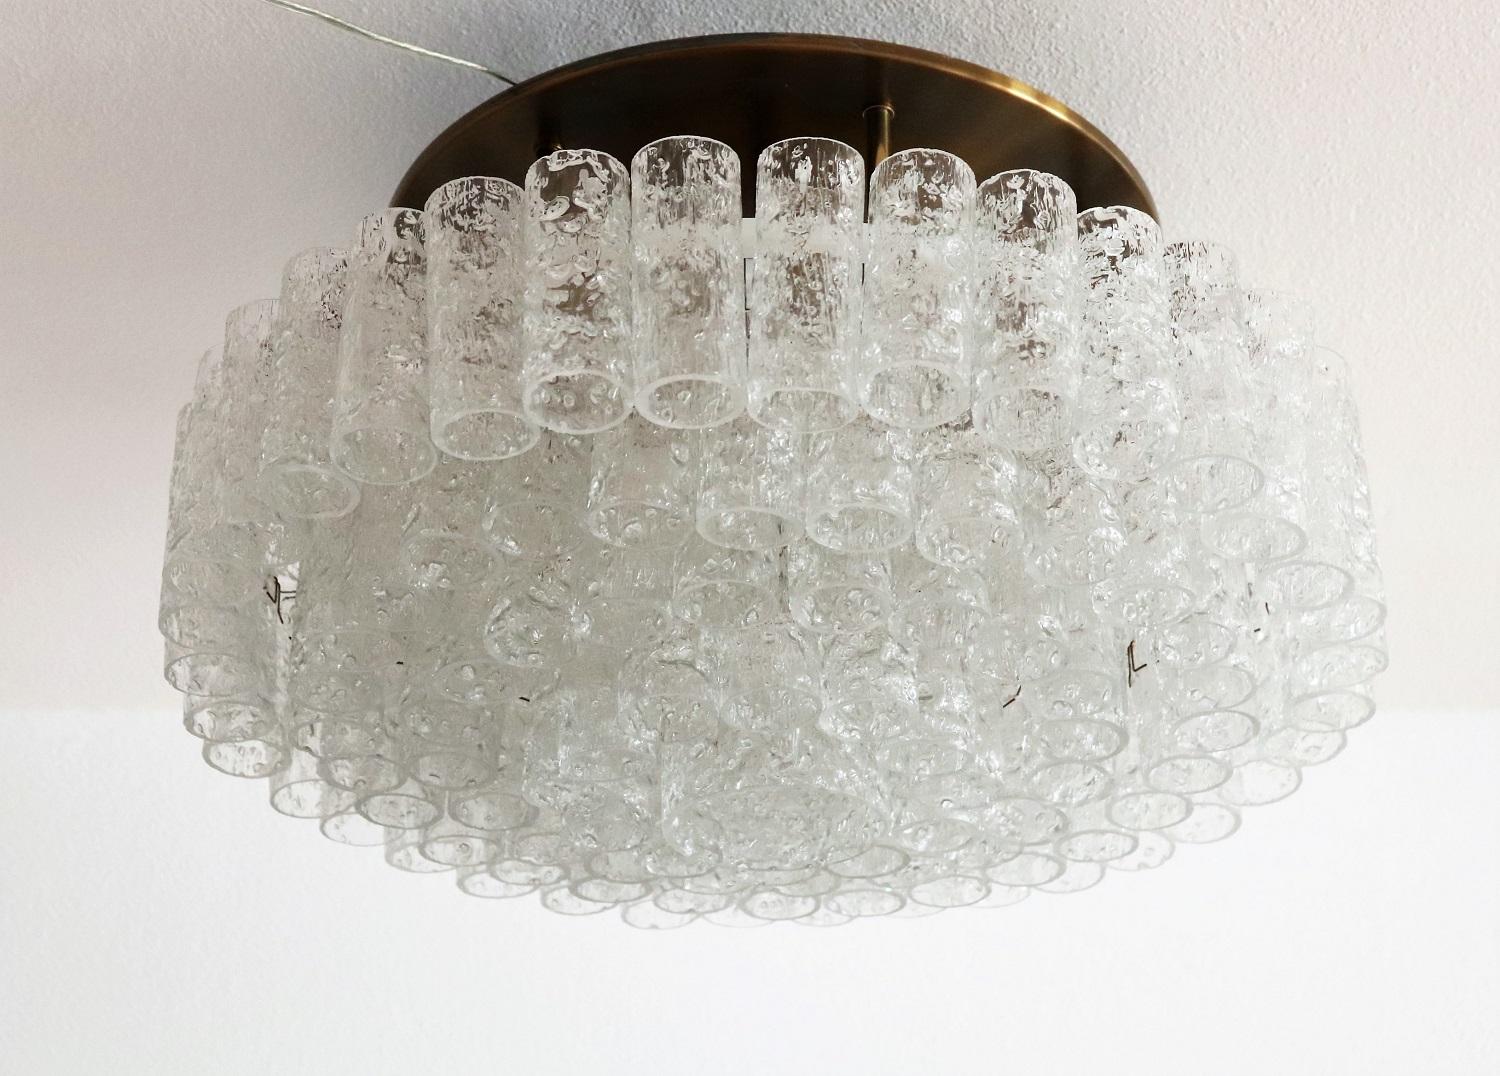 Gorgeous big chandelier or flush mount lighting with brass ceiling plate and 97 ice glass parts, all in excellent condition.
Made in Germany in the 1960s, with original DORIA lable.
The ceiling plate is equipped with 9 bulb holders for small bulbs